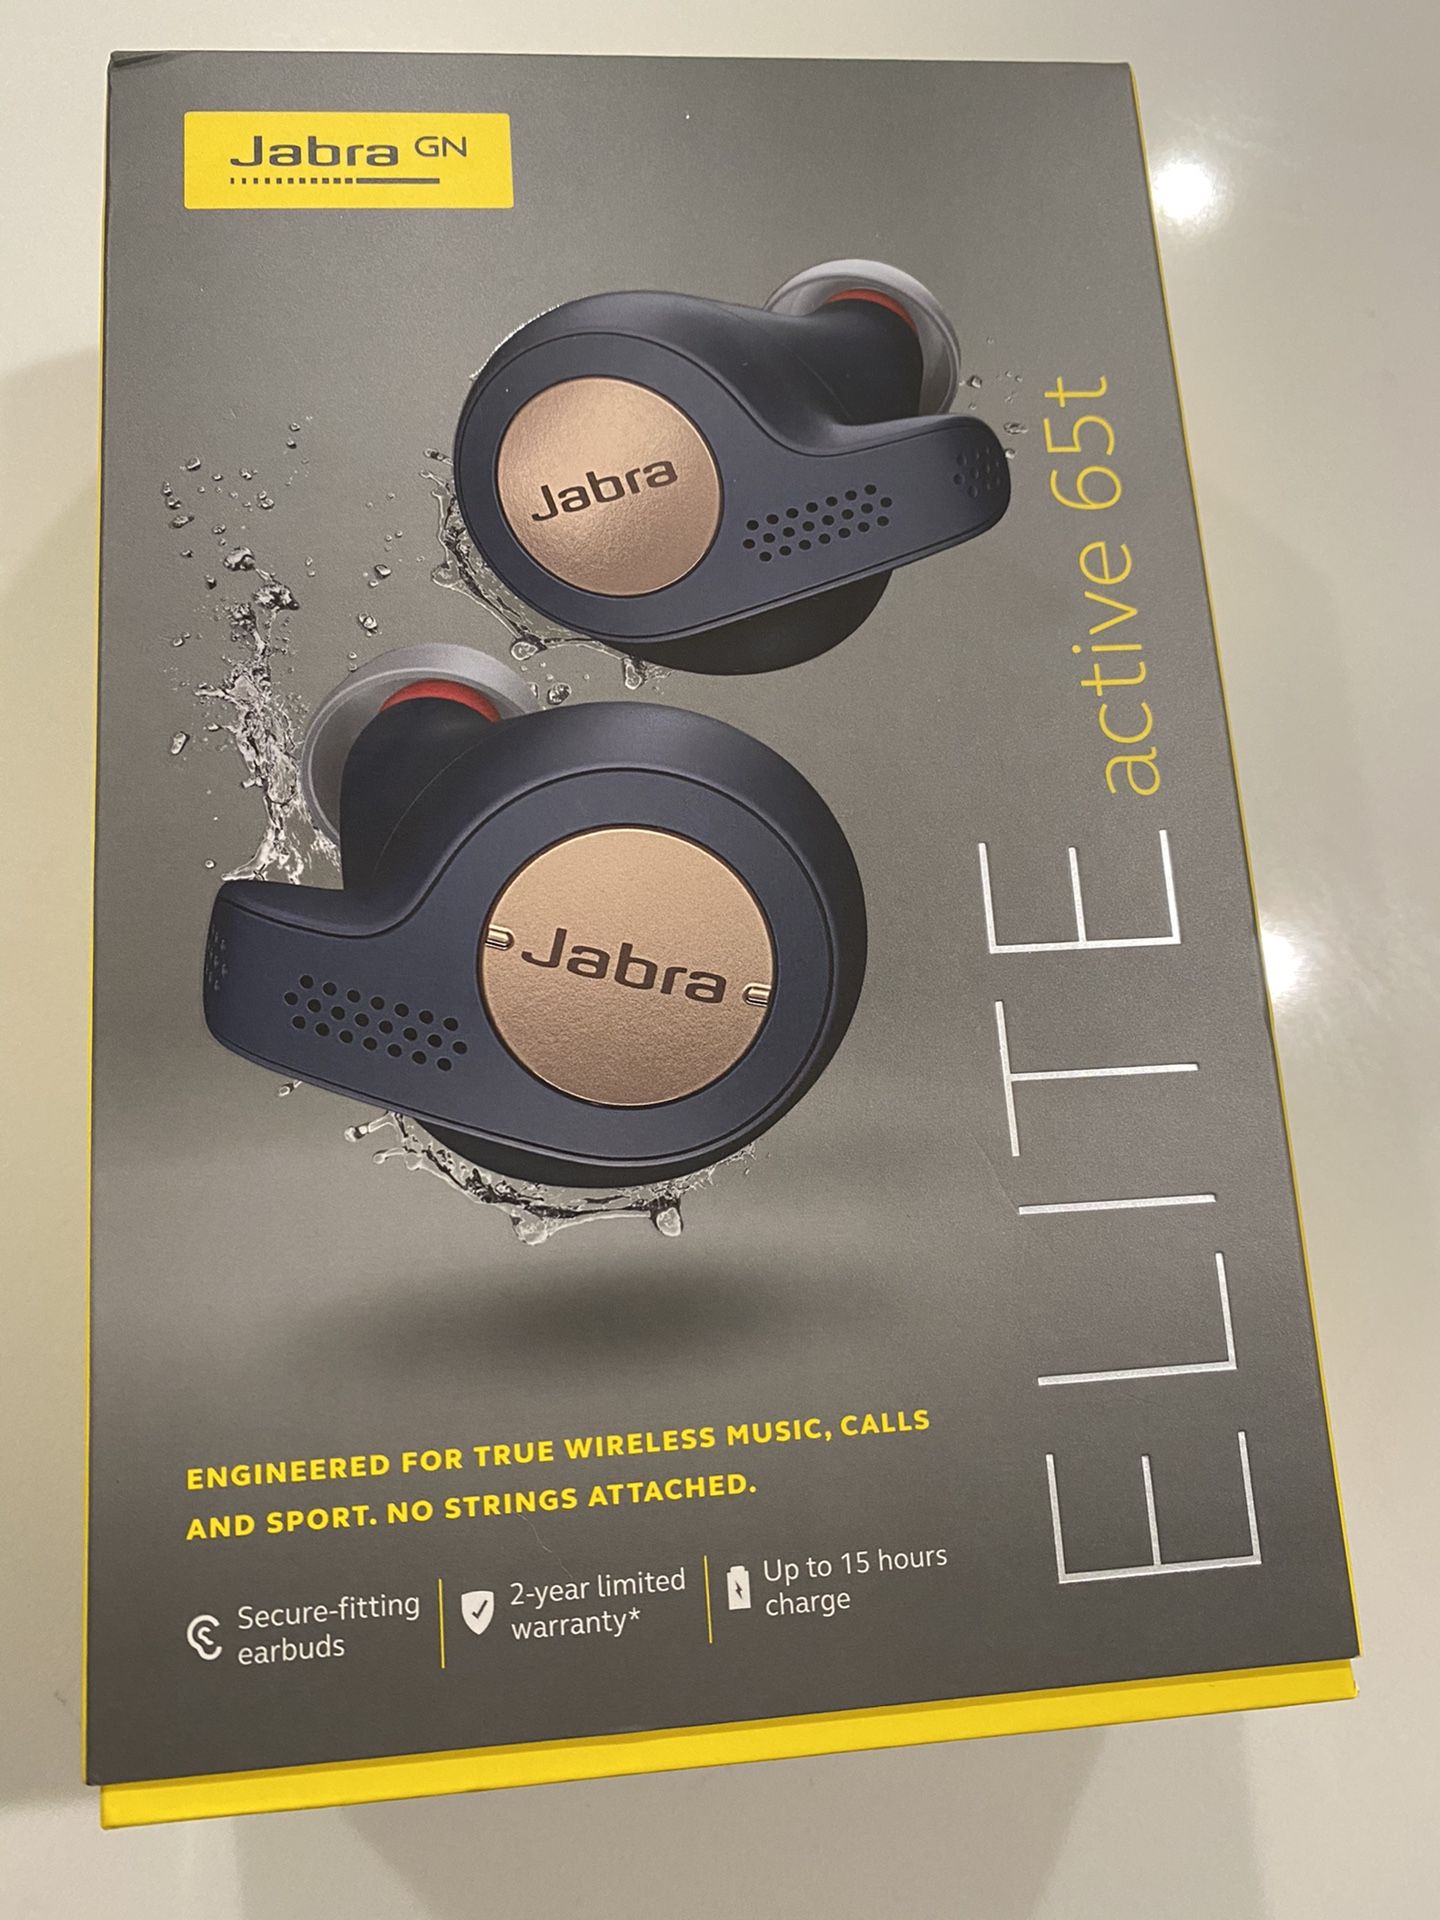 Jabra Elite 65t Earbuds – Alexa Built-In, True Wireless Earbuds with Charging Case, Navy Blue – Bluetooth Earbuds Engineered for the Best True W